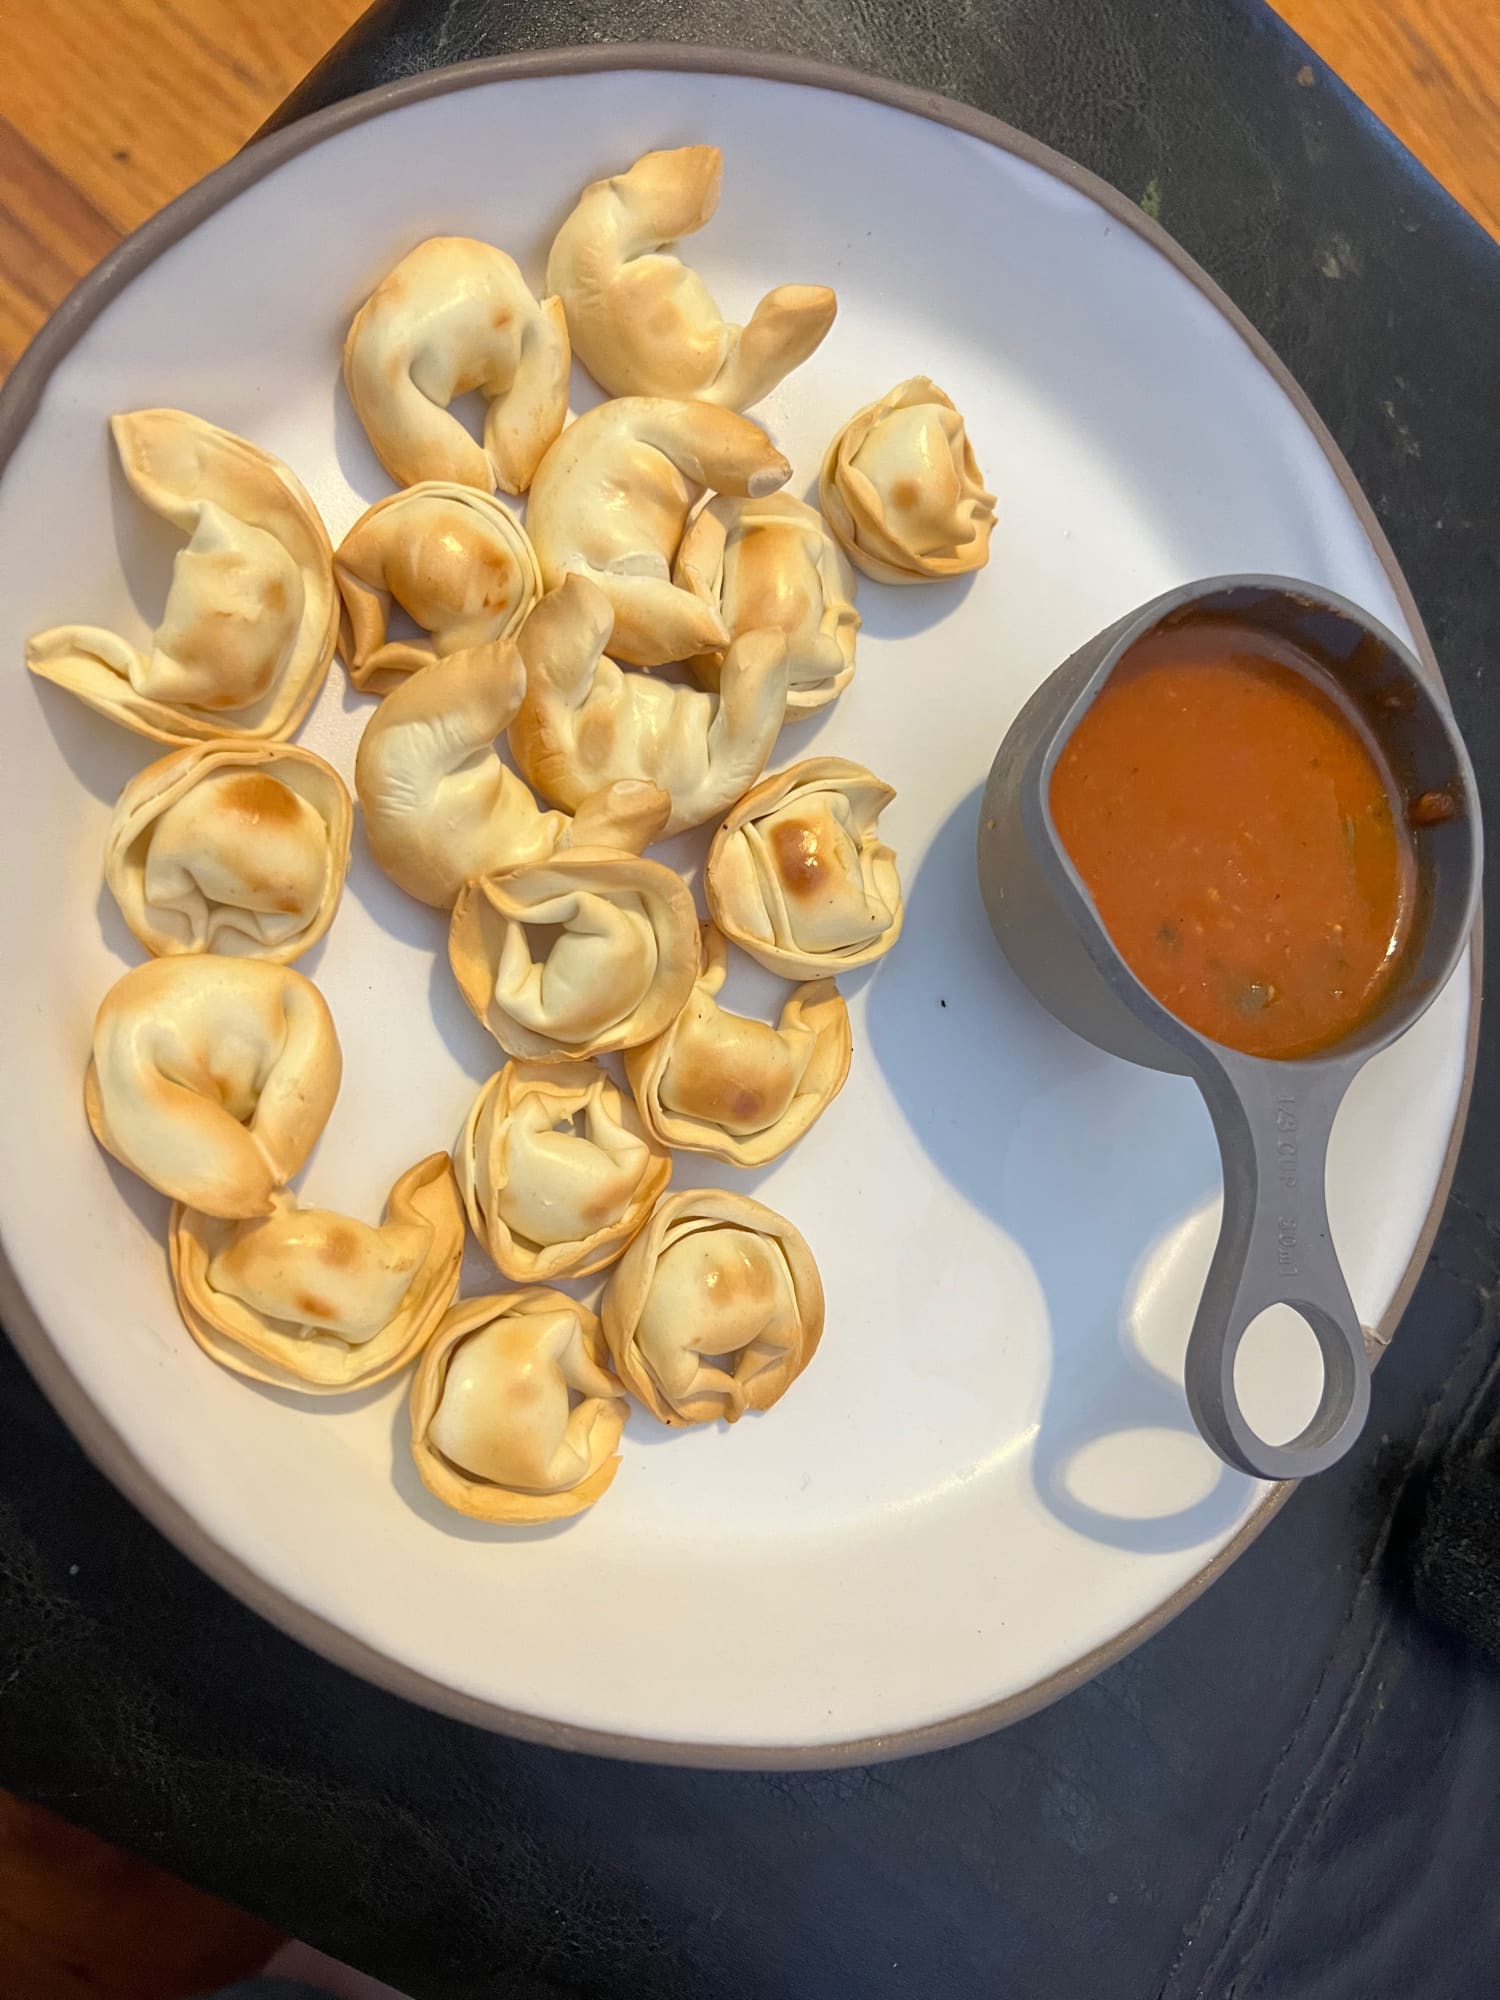 I Tried Air Fried Cheese Tortellini and It’s a Perfect Appetizer for Summer Entertaining